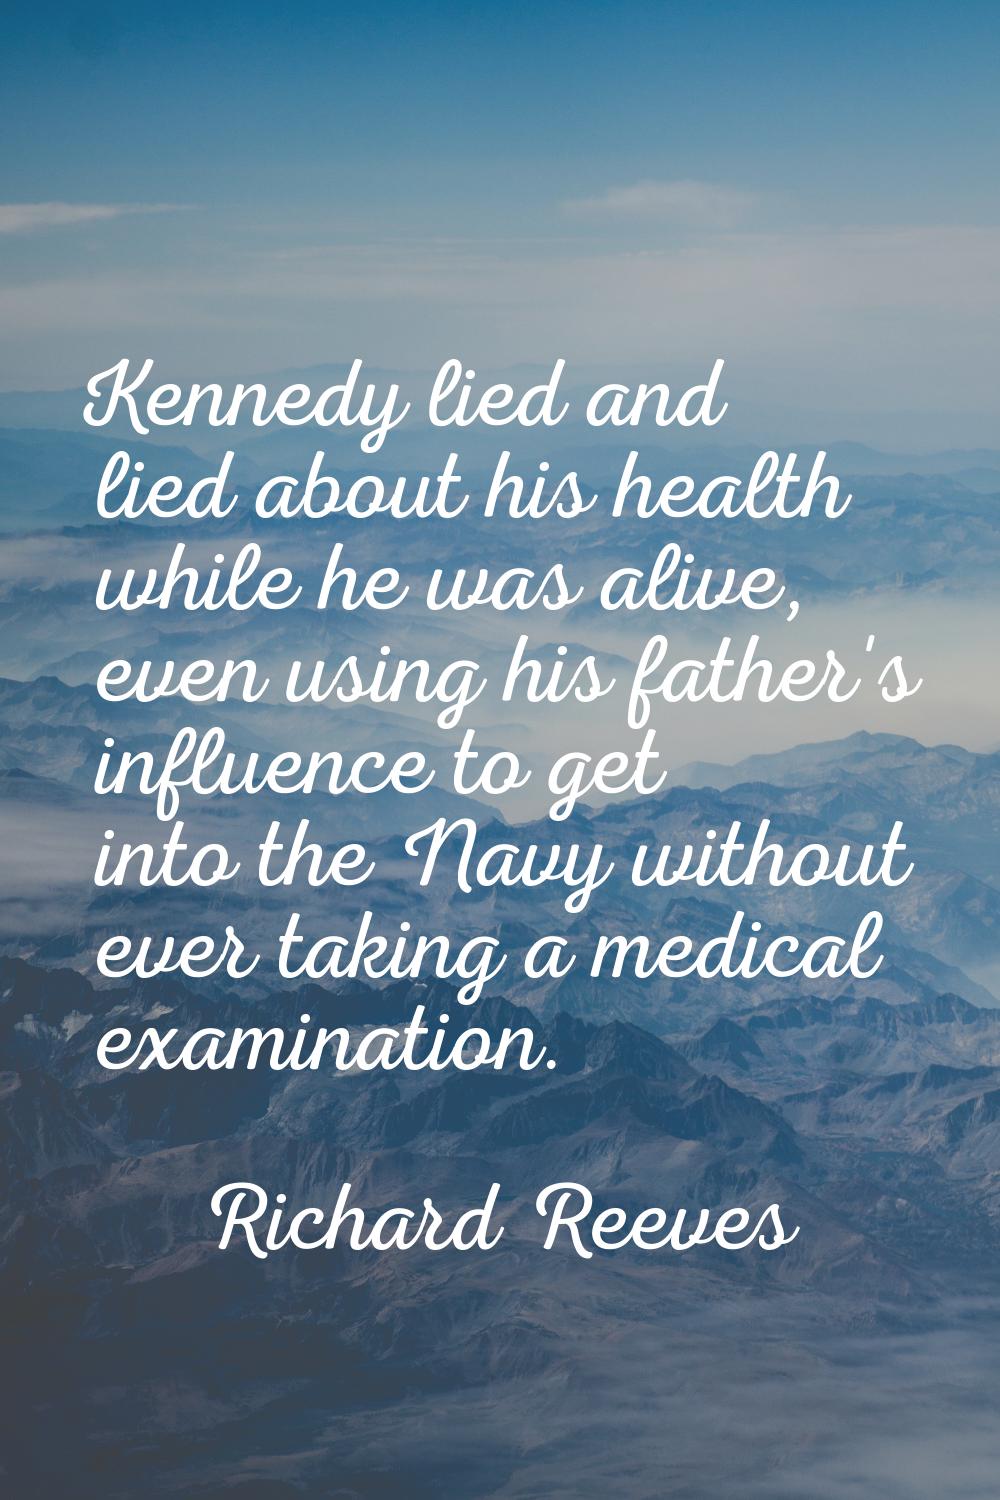 Kennedy lied and lied about his health while he was alive, even using his father's influence to get